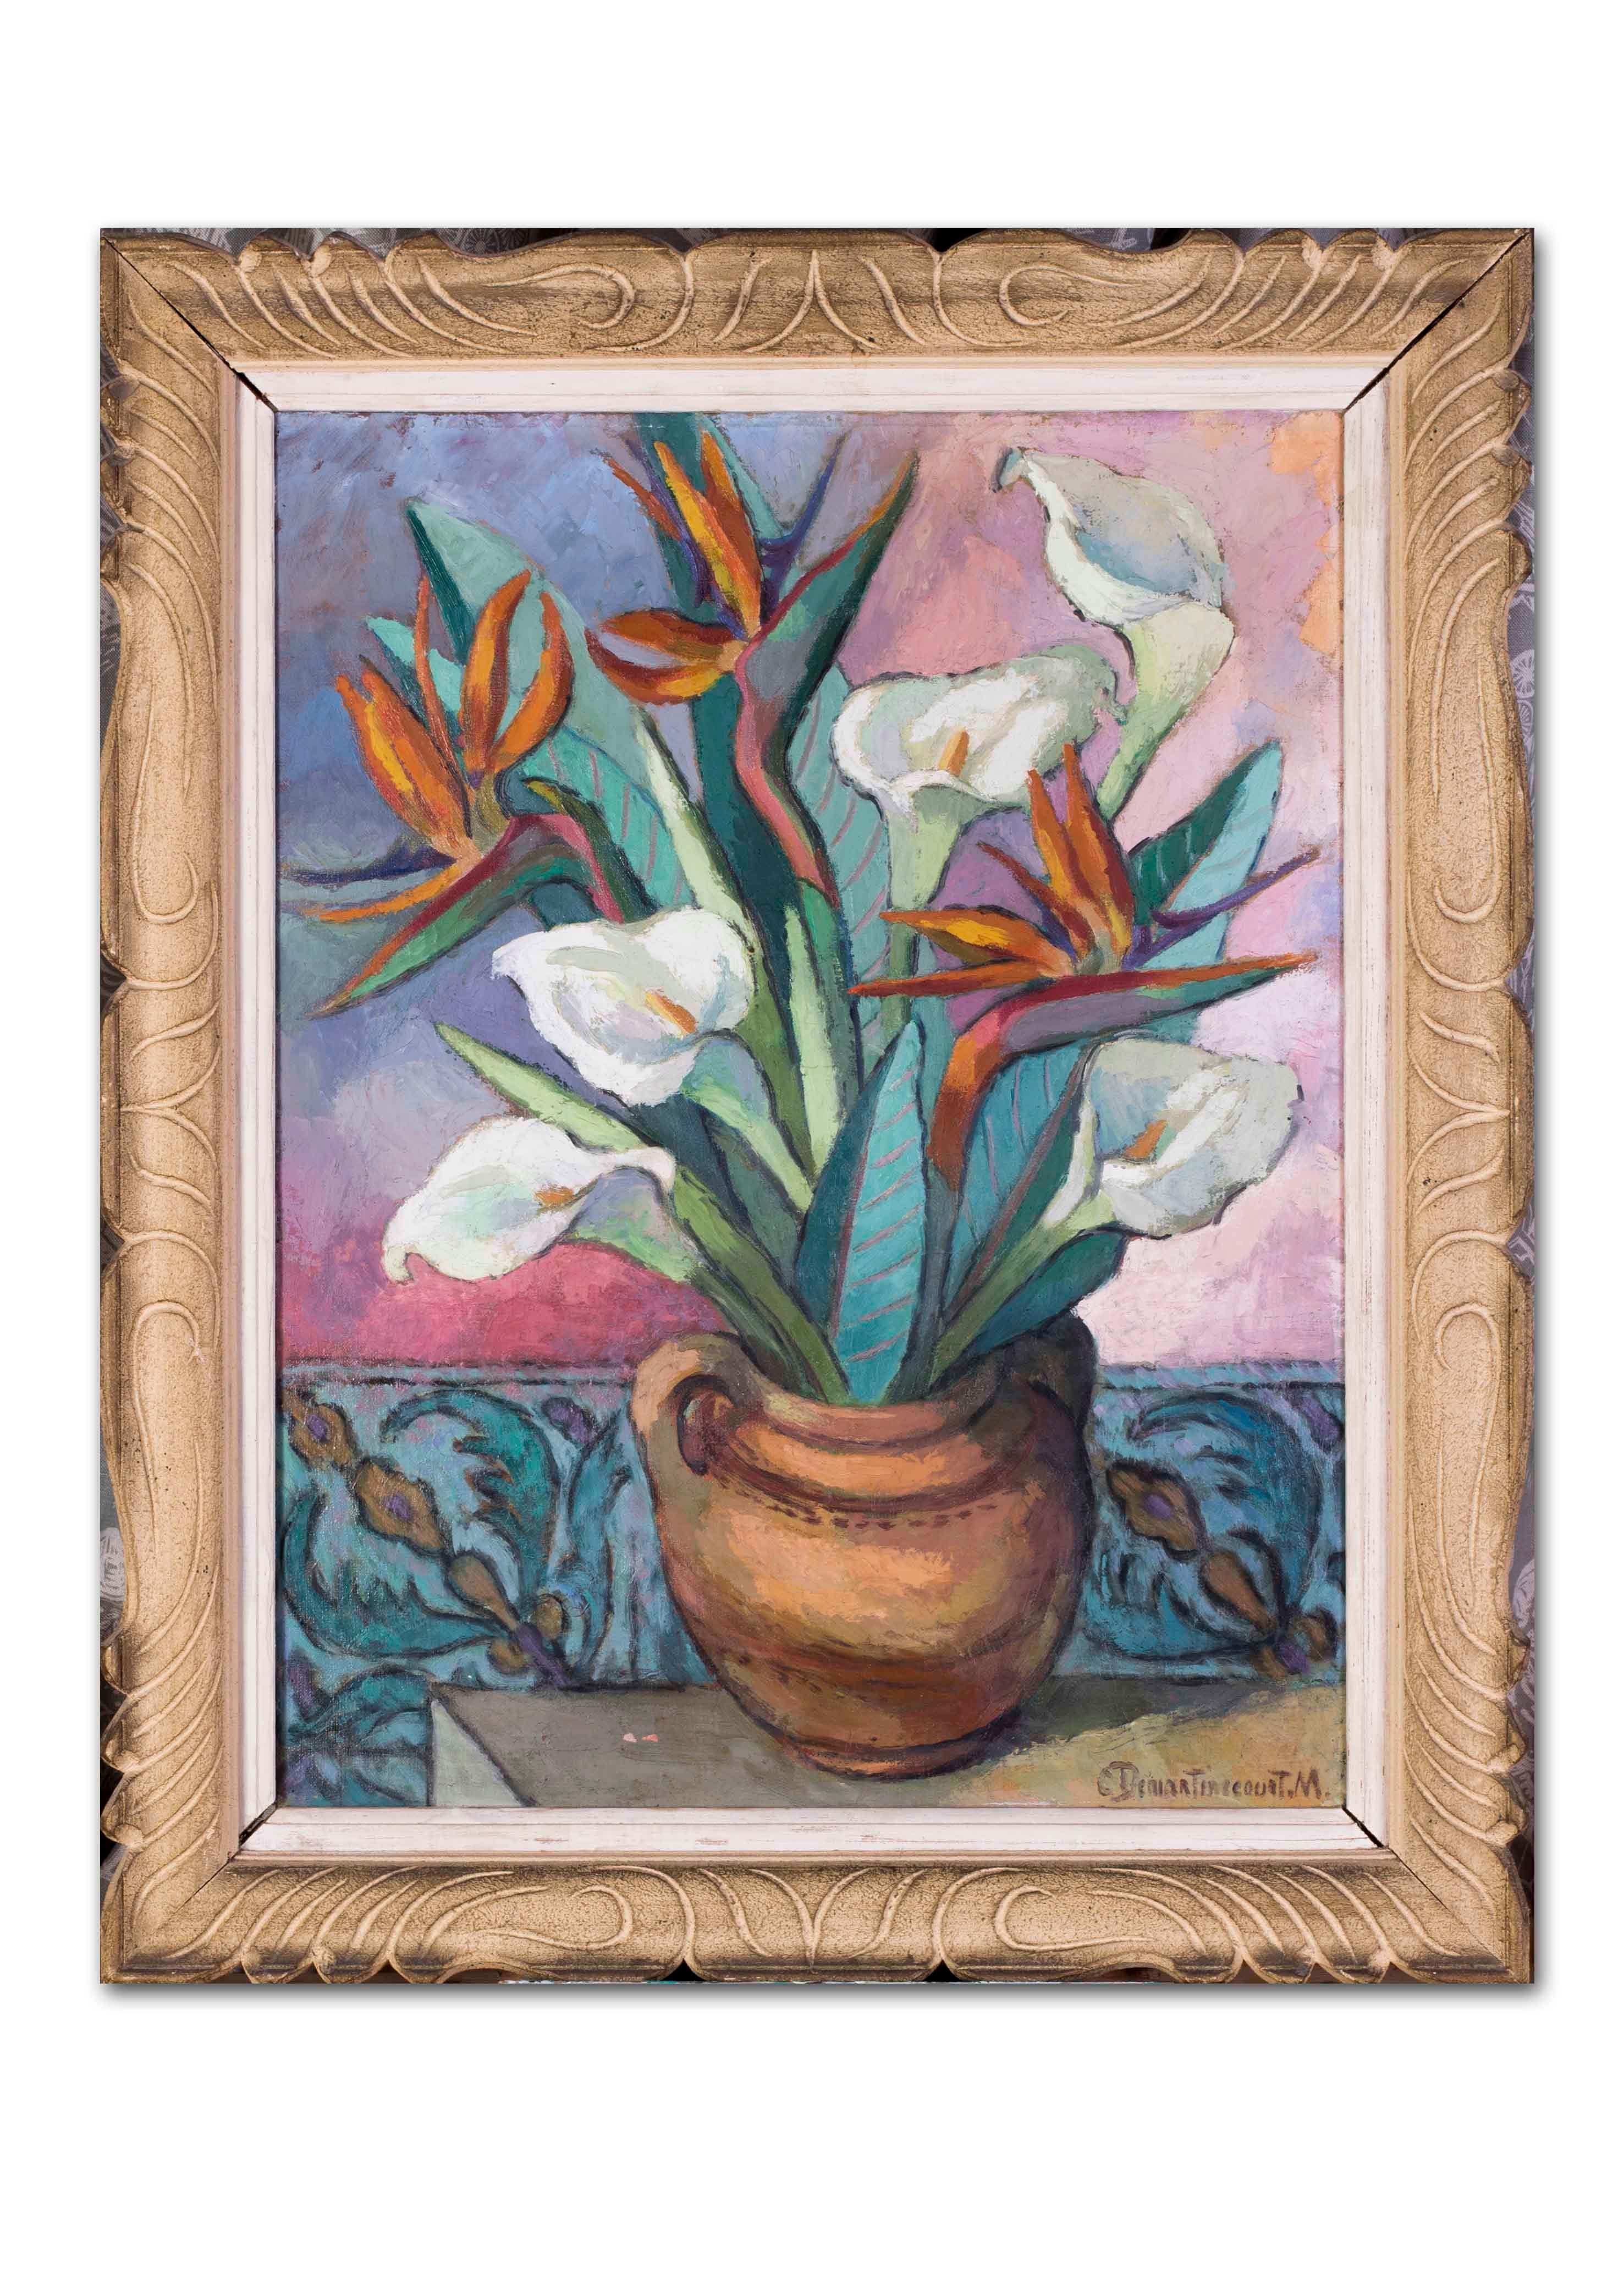 Claire Demartinecourt-Modret (French, 20th Century)
Lilies and Birds of paradise
Oil on canvas, signed ‘C. Demartinecourt. M’ (lower right)
25.5/8 x 19.3/4 in. (65.2 x 50cm.)
